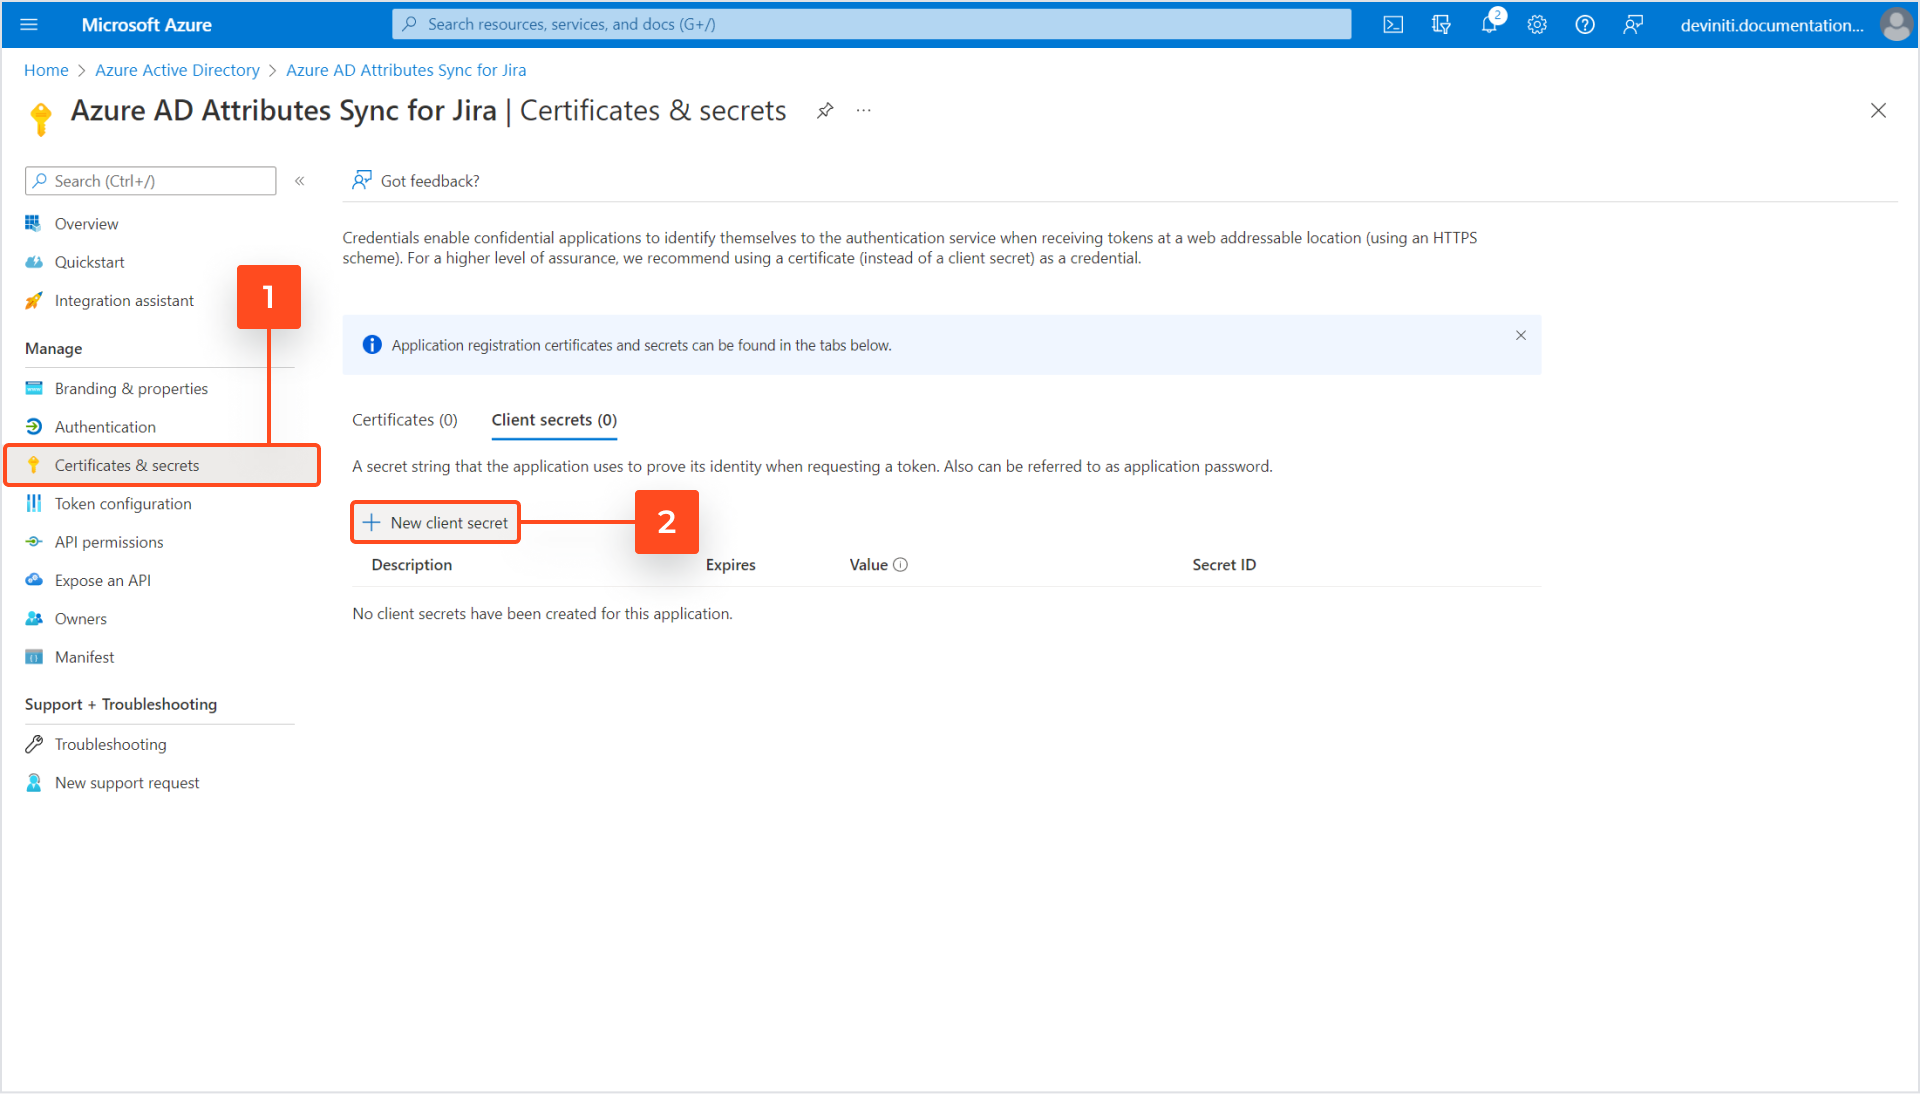 Jira Active Directory integration with Azure AD Attributes - Generating a client secret on the Azure portal